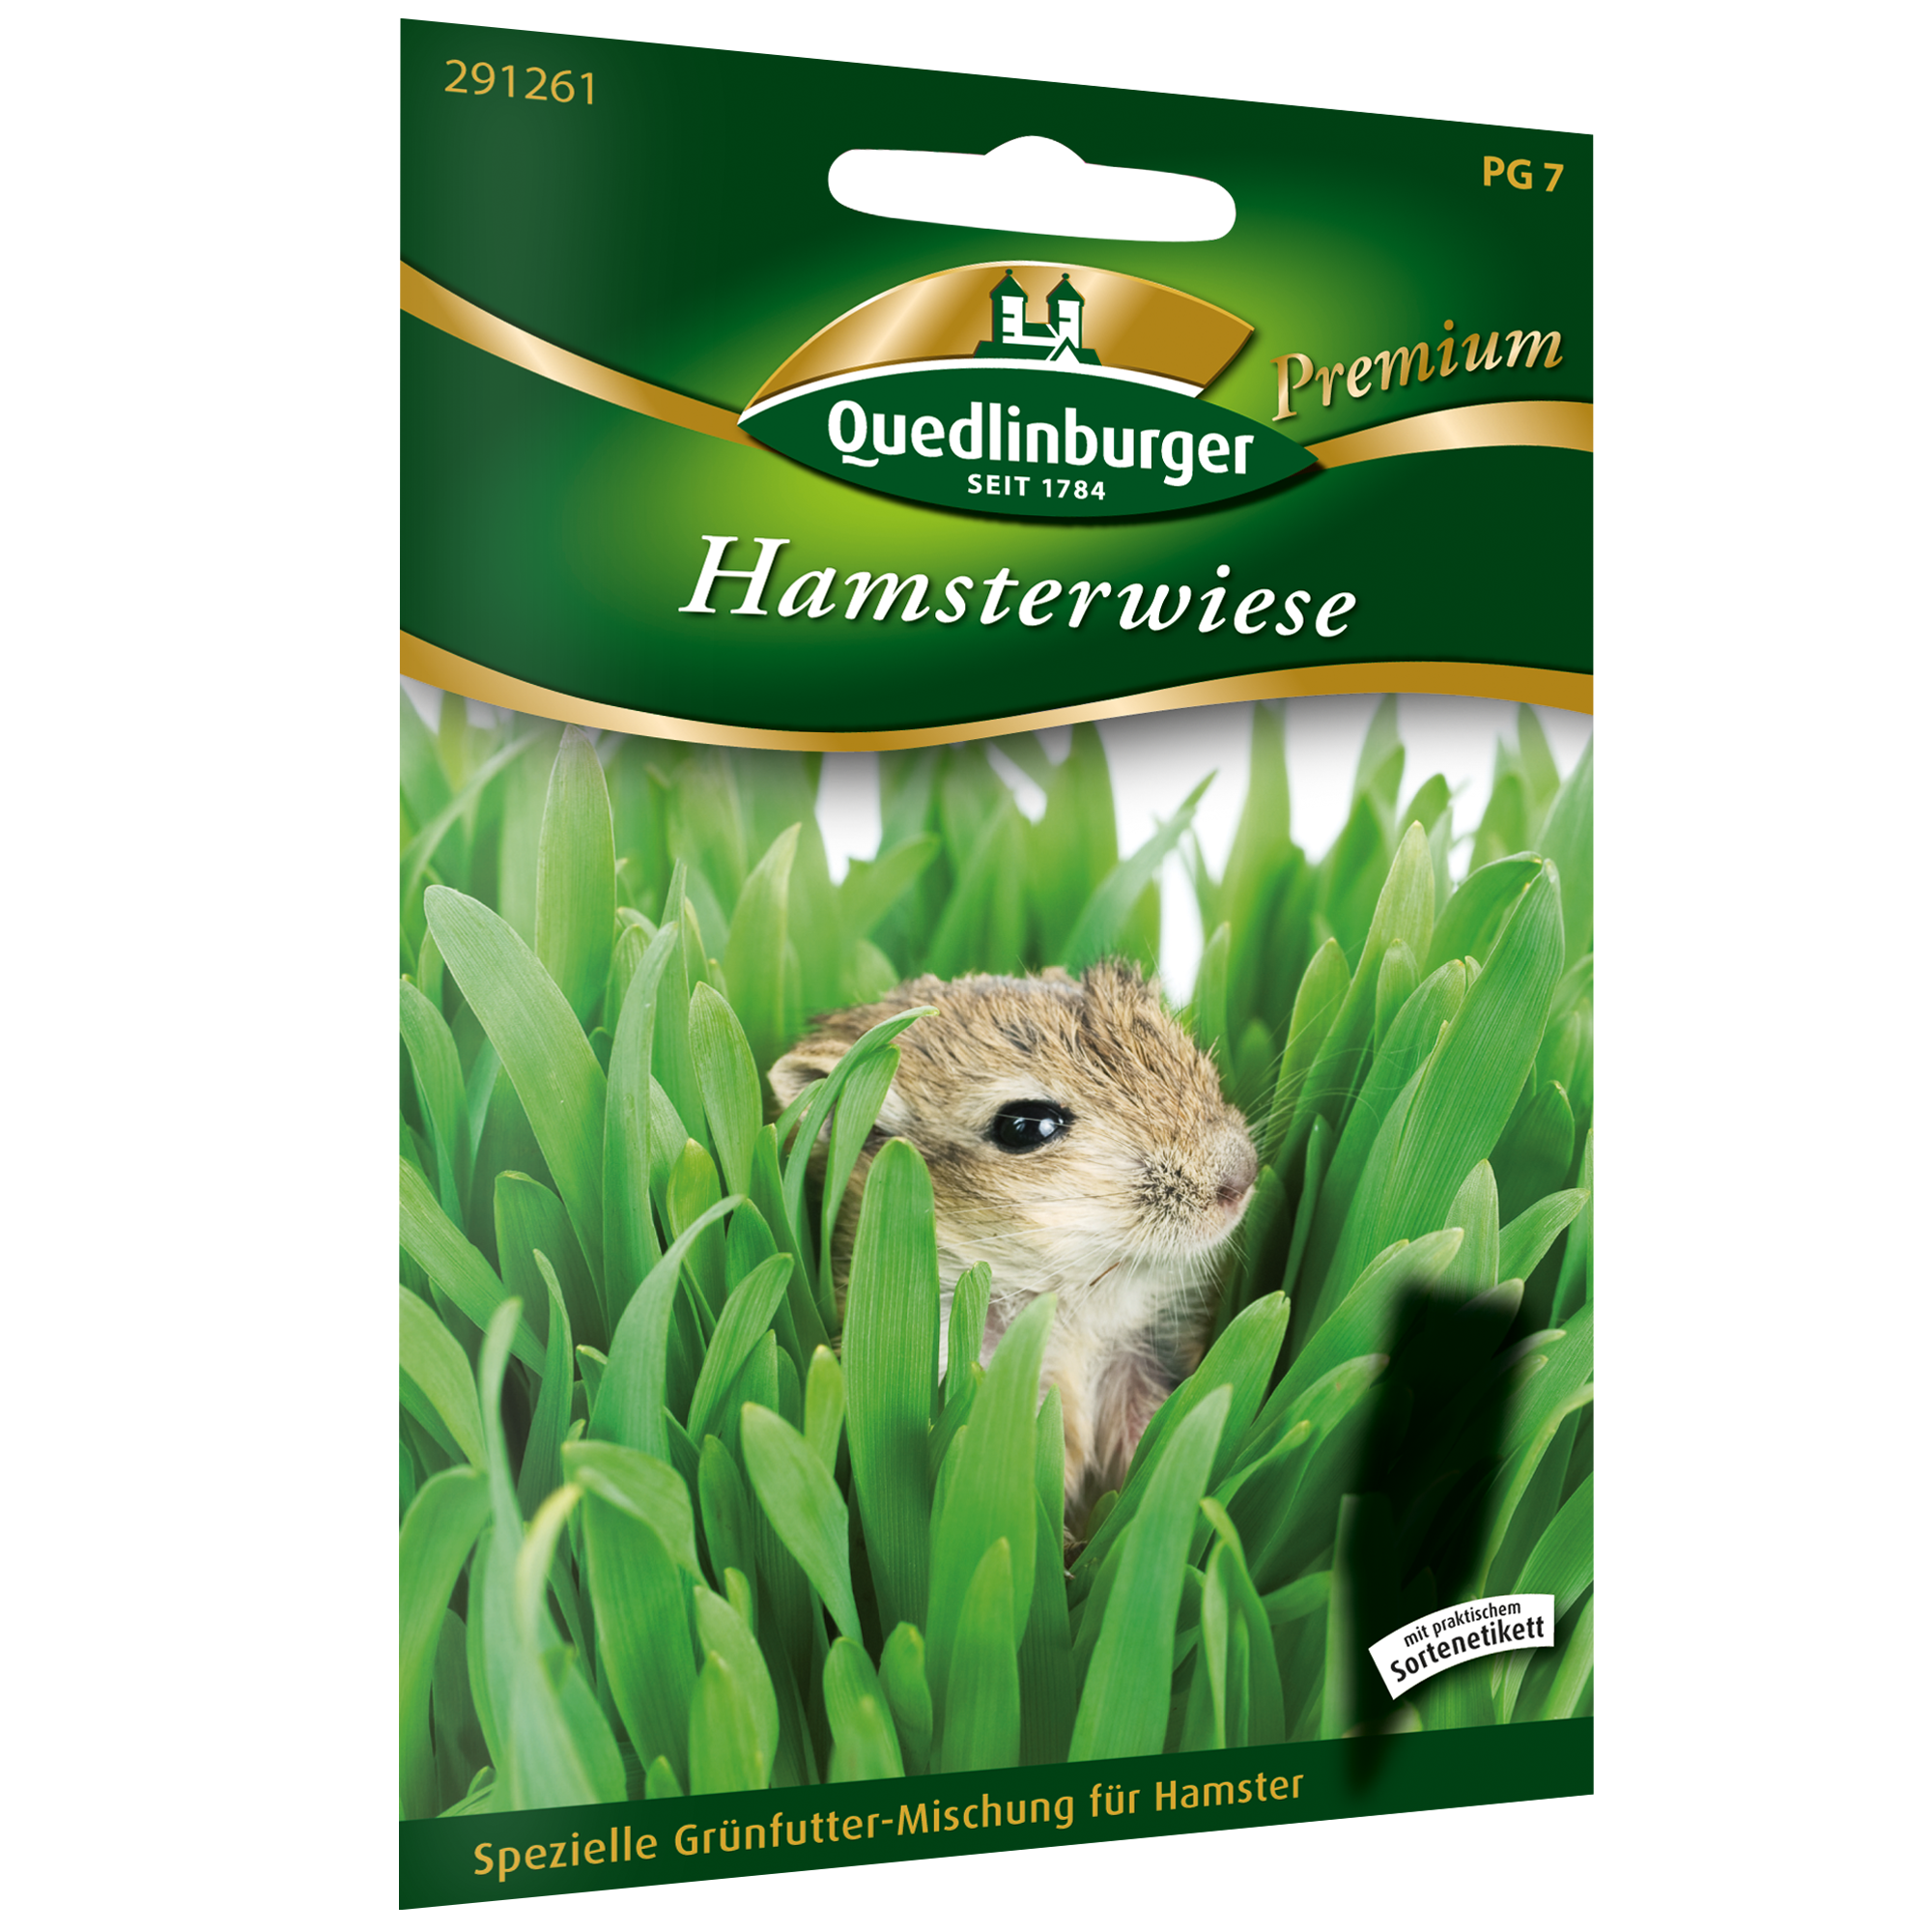 Grünfutter 'Hamsterwiese' Mischung + product picture